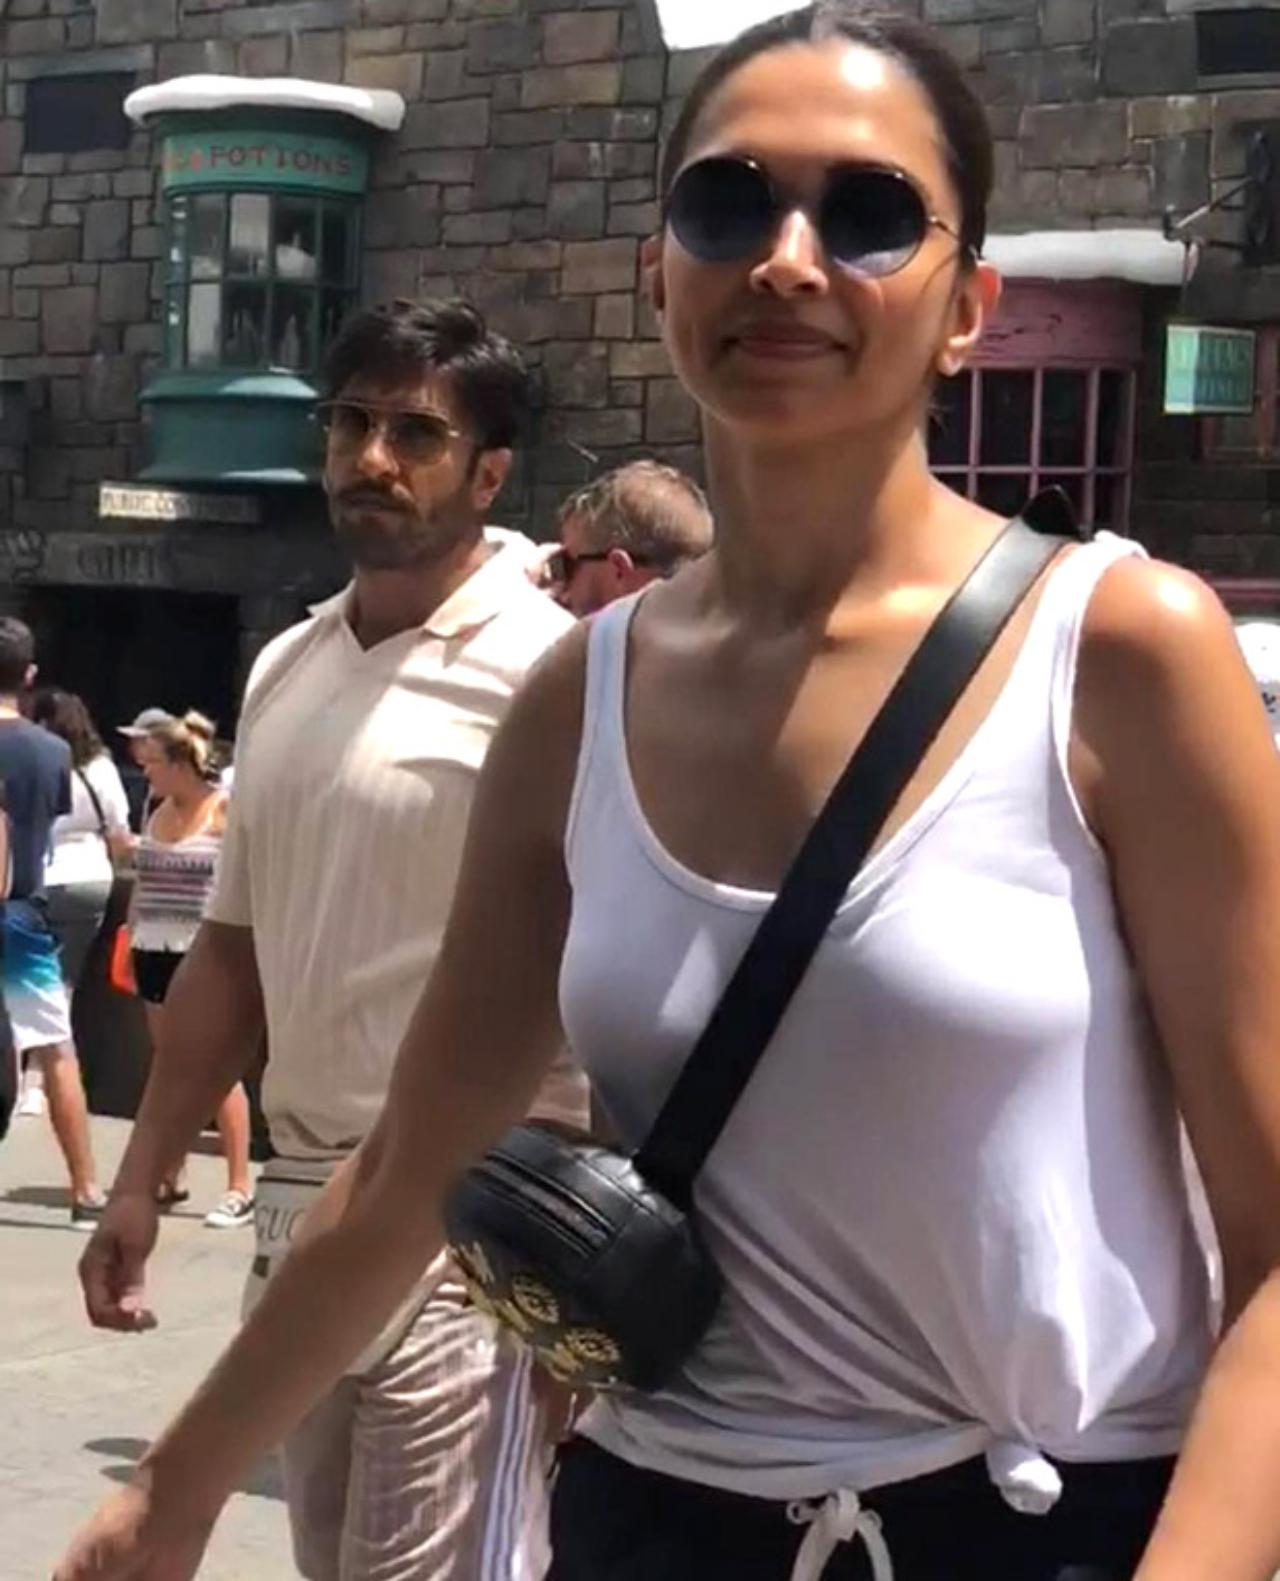 Deepika and Ranveer had once visited Disneyland and were papped by fans. The video and pics went viral as Deepika had asked fans to not click them without permission